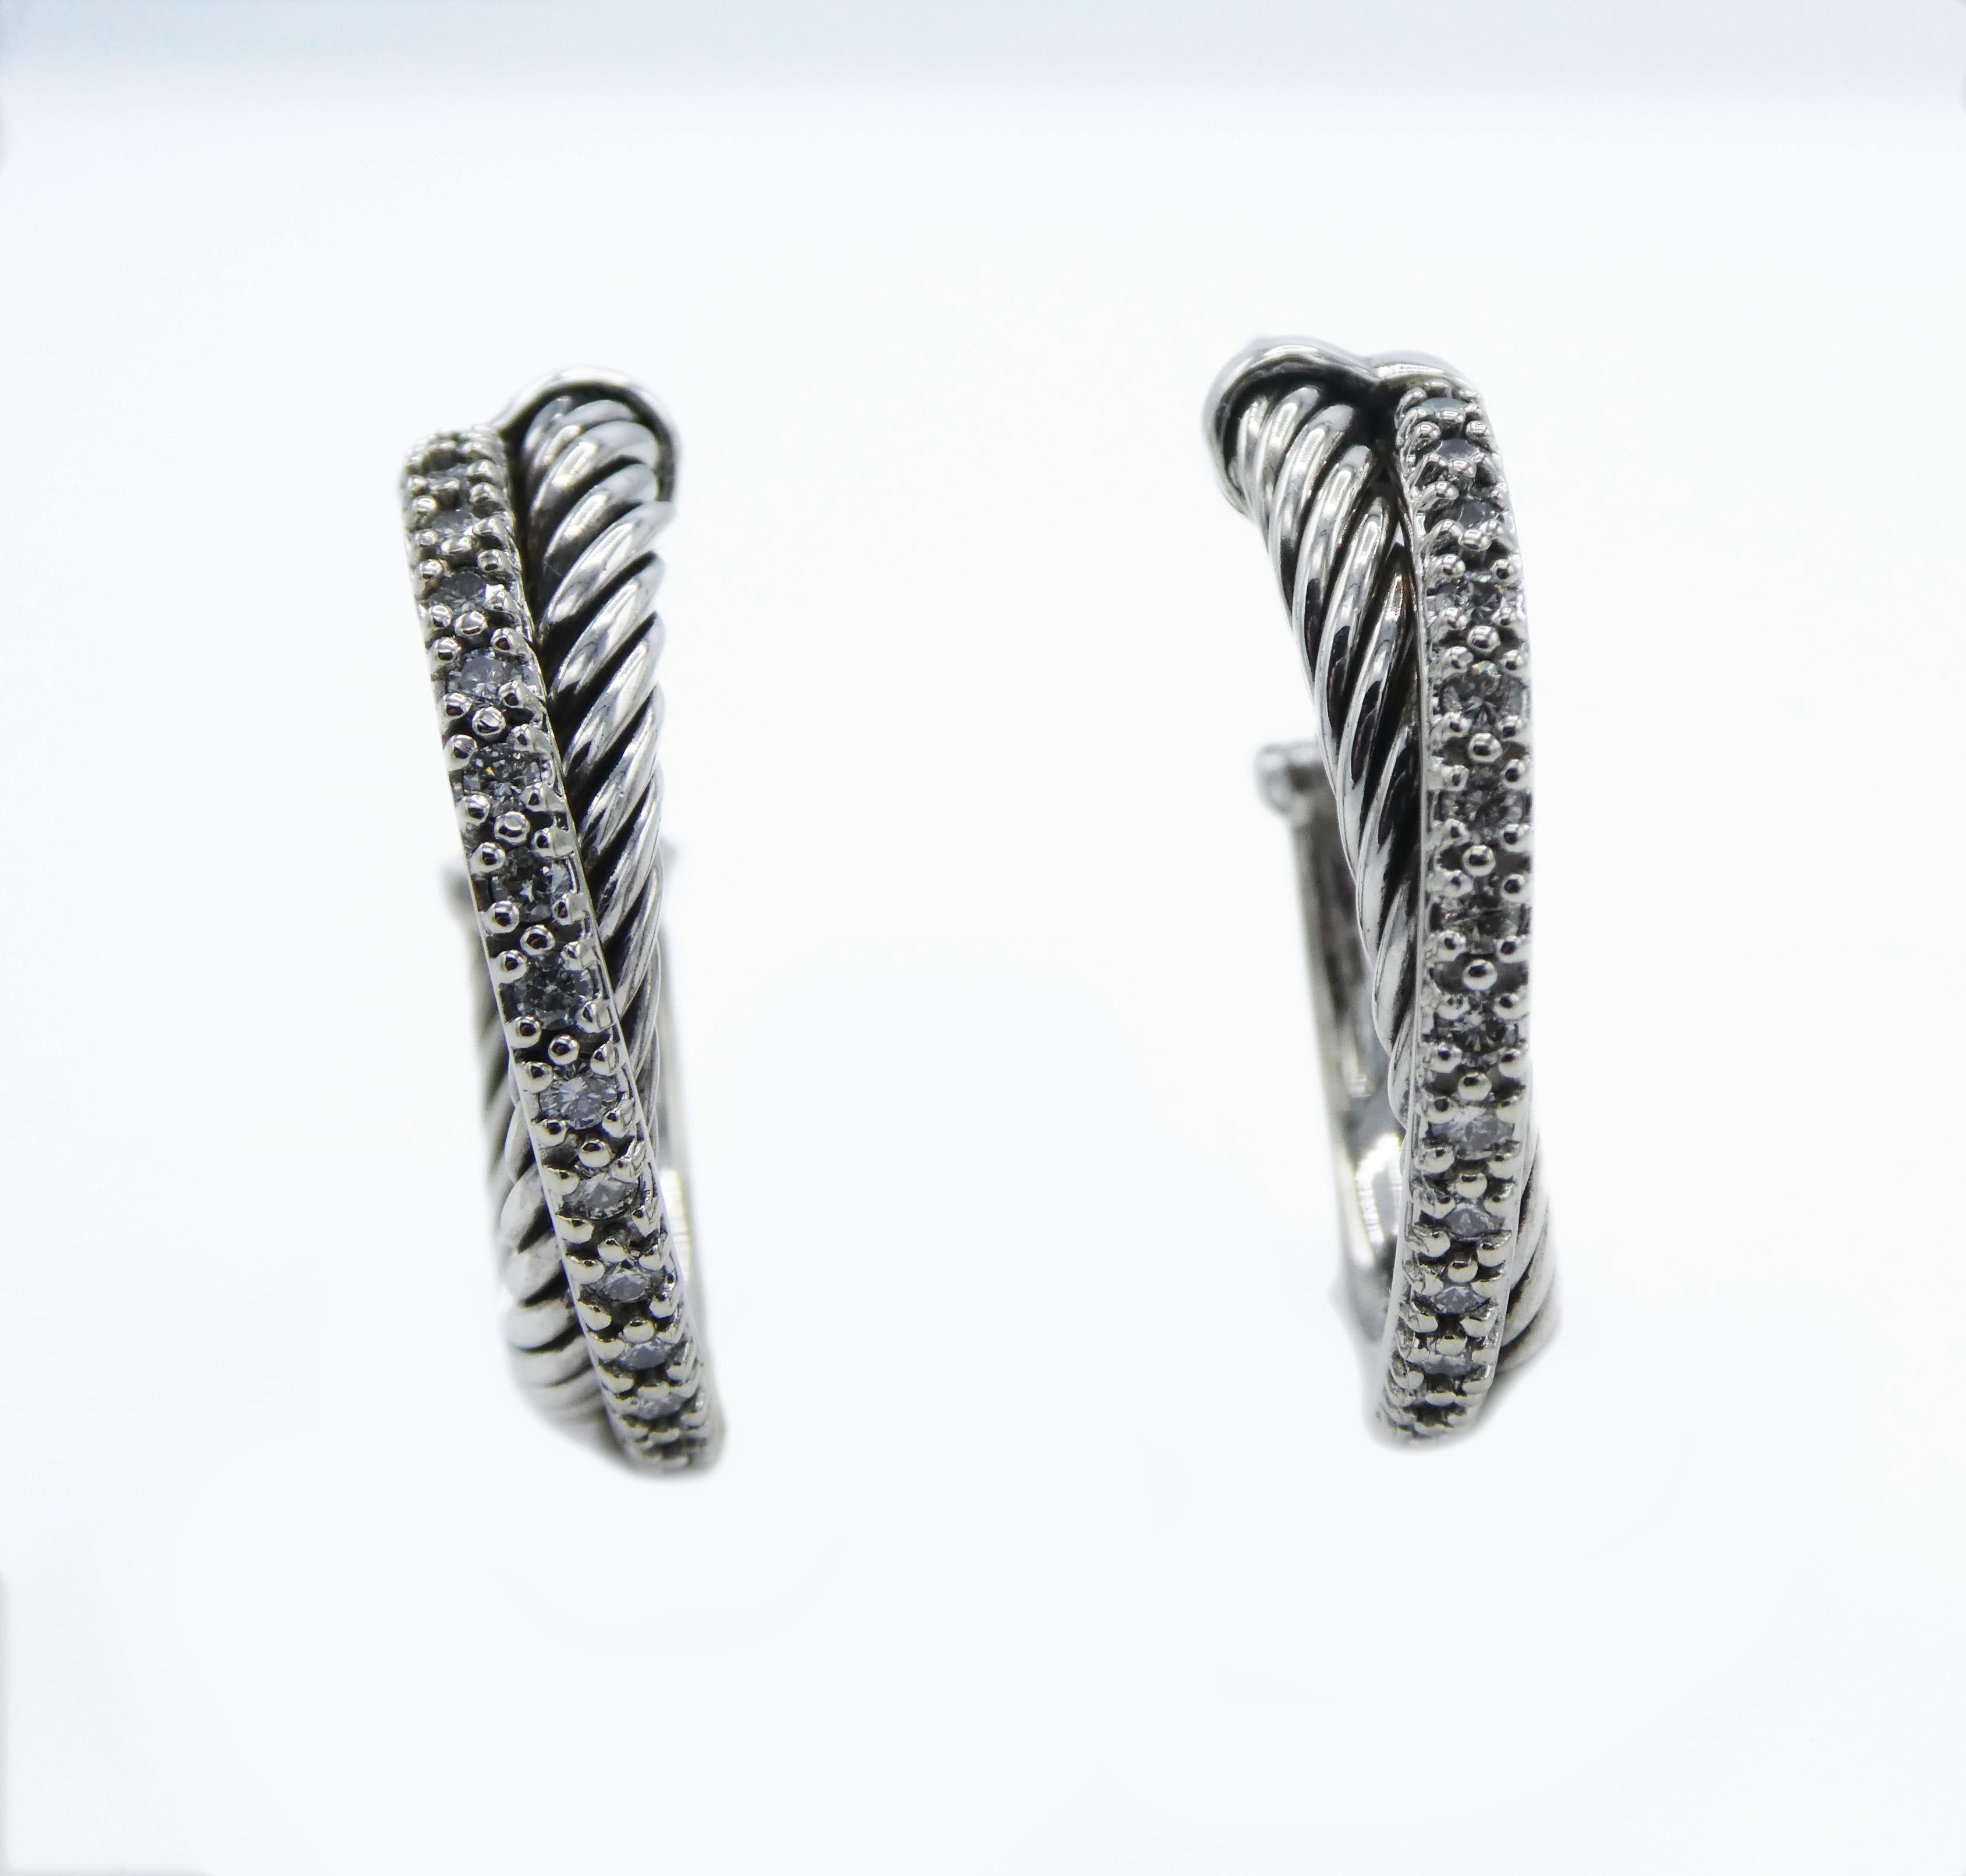 David Yurman Diamond Hoop Cable Crossover Earrings Sterling Silver & White Gold
Metal: Sterling silver 925, 14k White Gold 585
Weight: 8.24 grams
Diamonds: 34 Round Brilliant Cut Diamonds approx. 0.31ctw
approx. 25mm in diameter
Signed: D.Y. 925